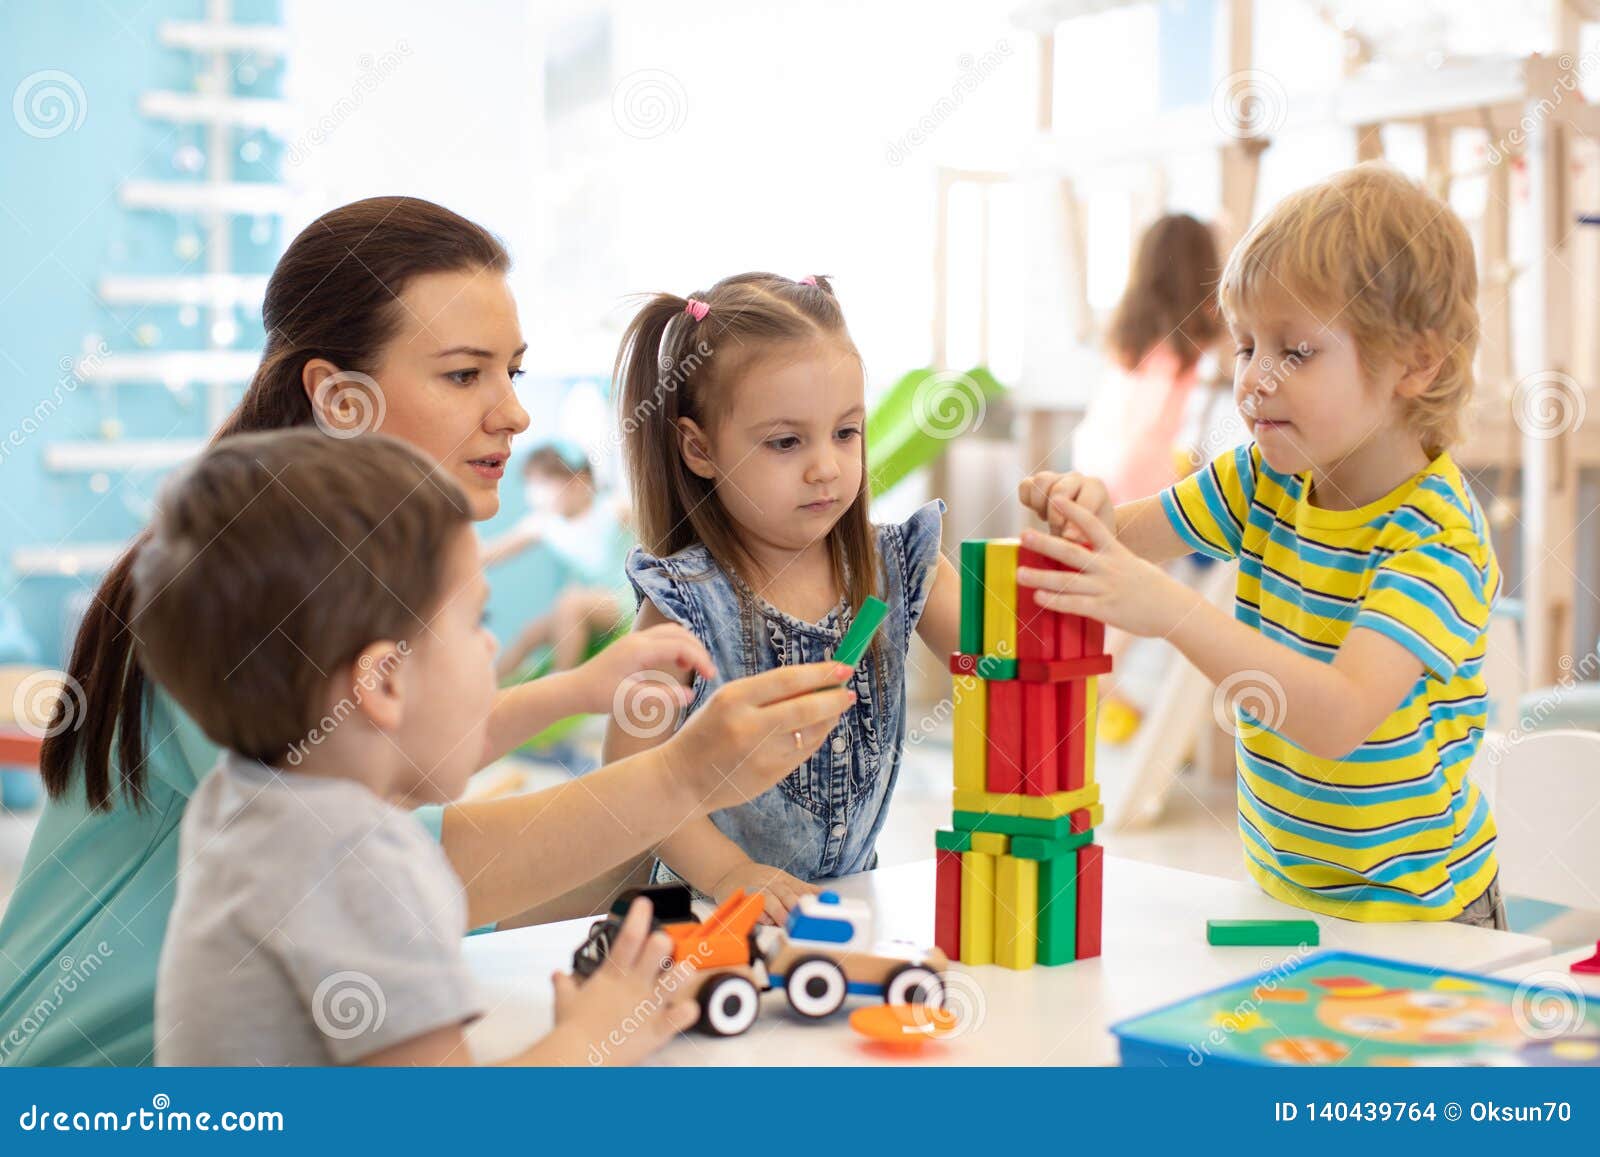 26,229 Daycare Photos - Free & Royalty-Free Stock Photos from Dreamstime